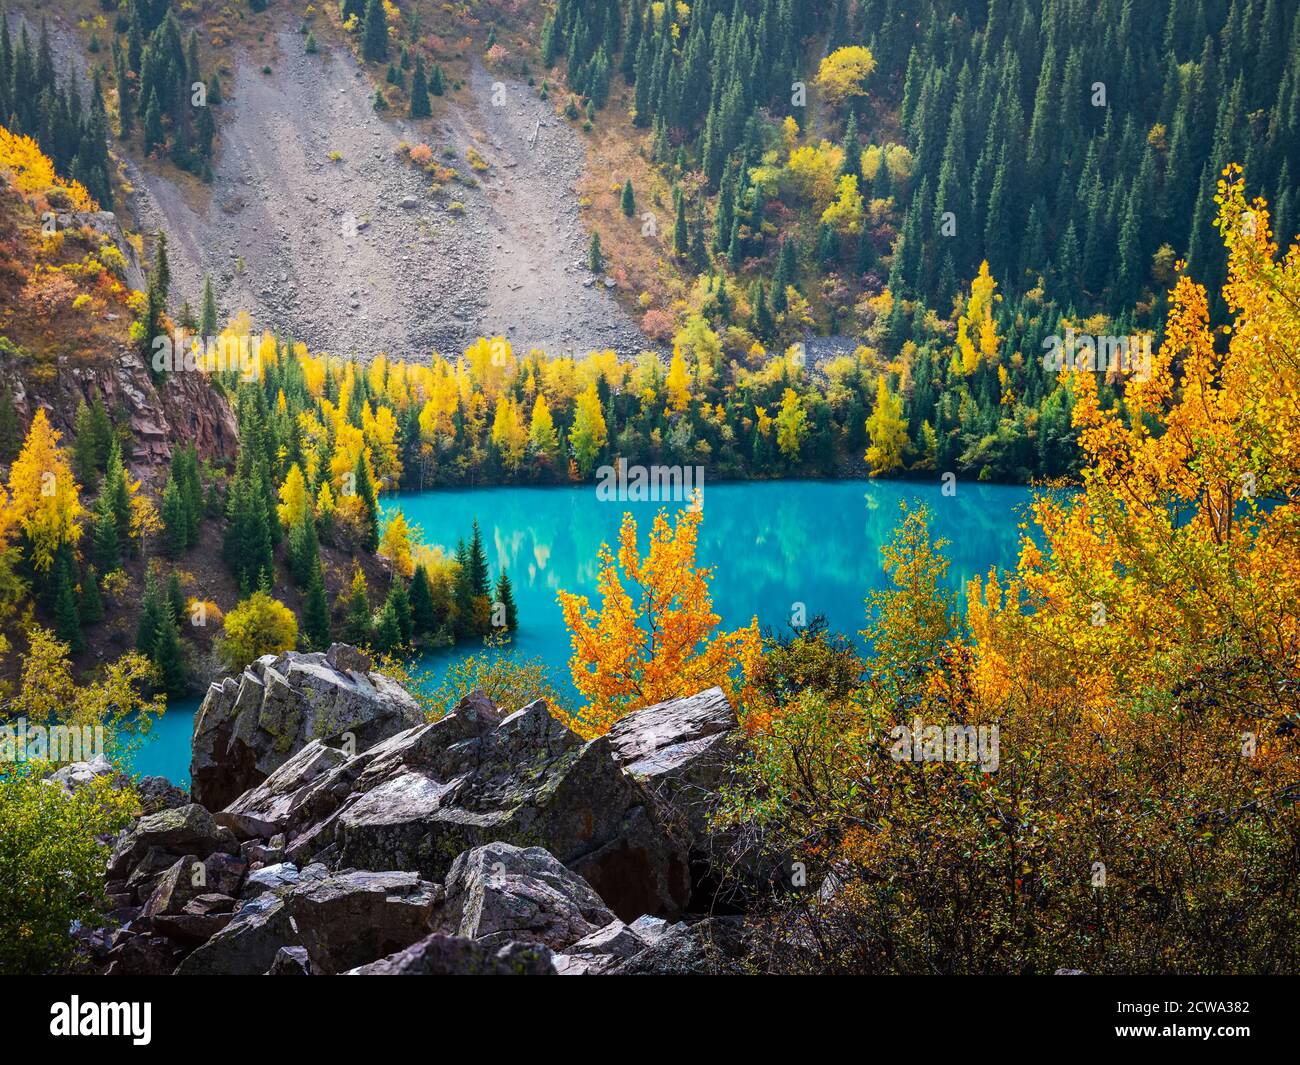 Autumn mood view of the Issyk mountain lake. The turquoise lake is surrounded by mountains with yellowed trees. Stock Photo